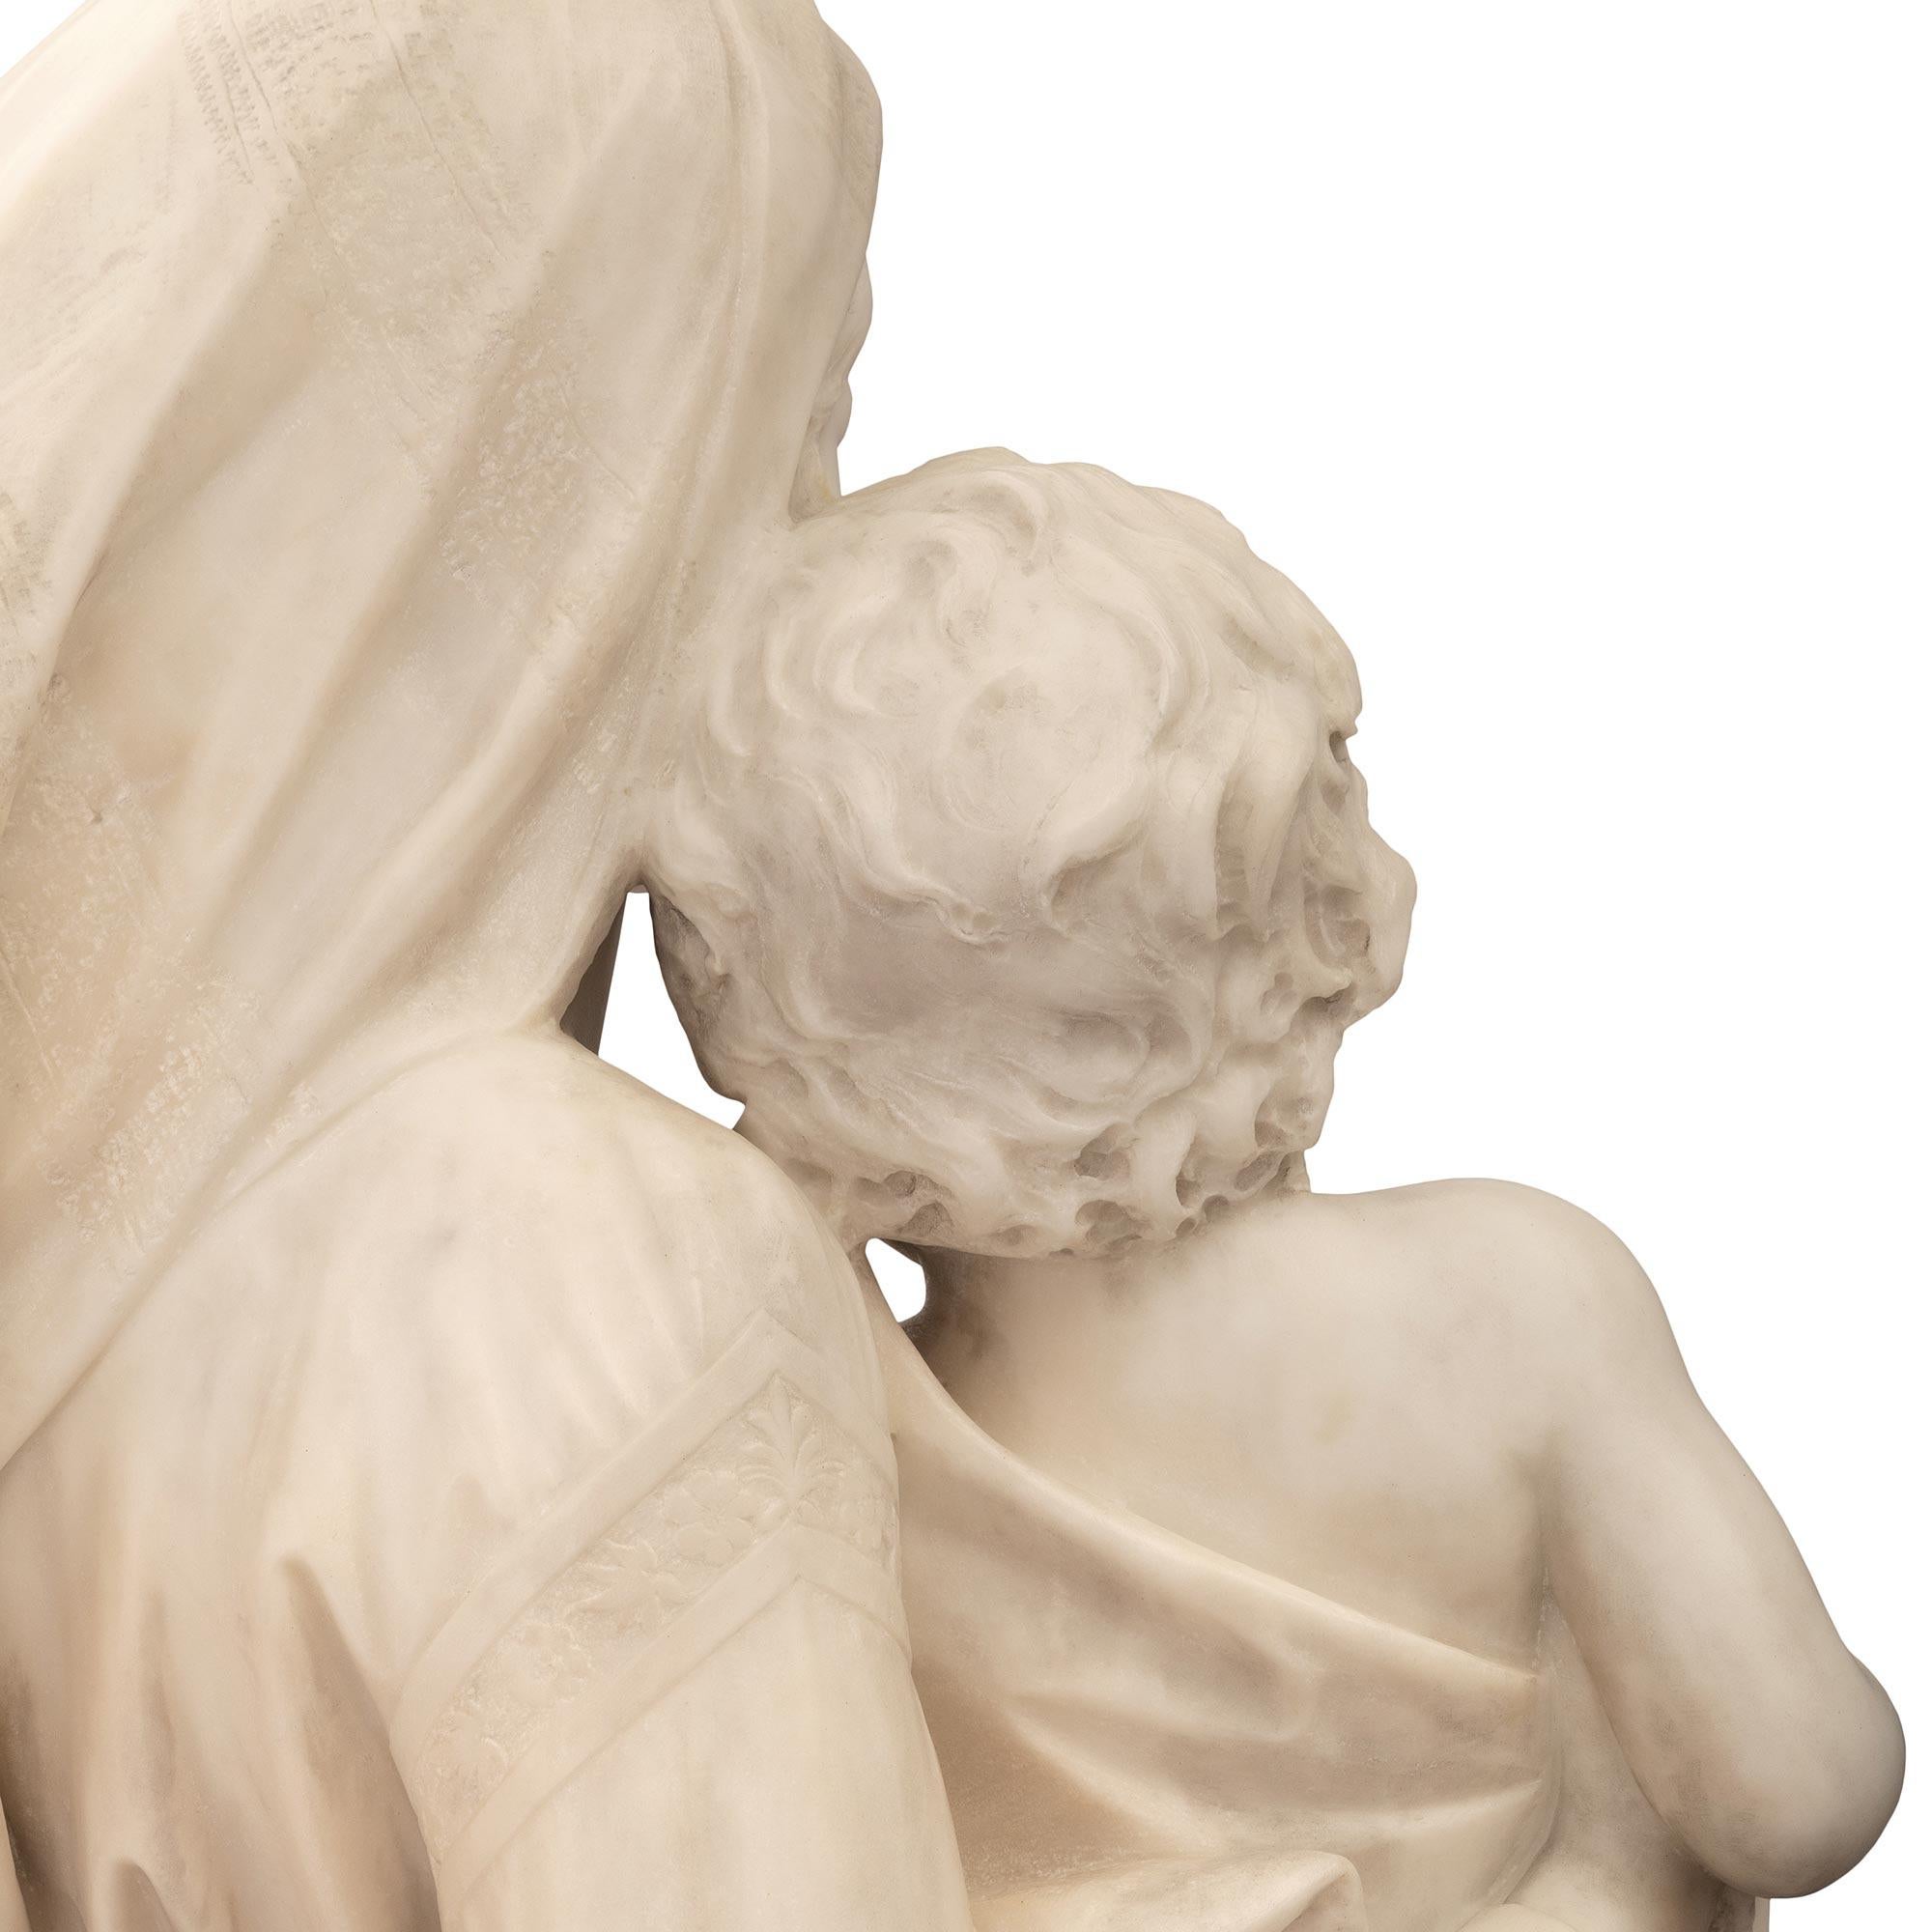 Italian 19th Century White Carrara Marble Life-Size Statue of Madonna and Child For Sale 3